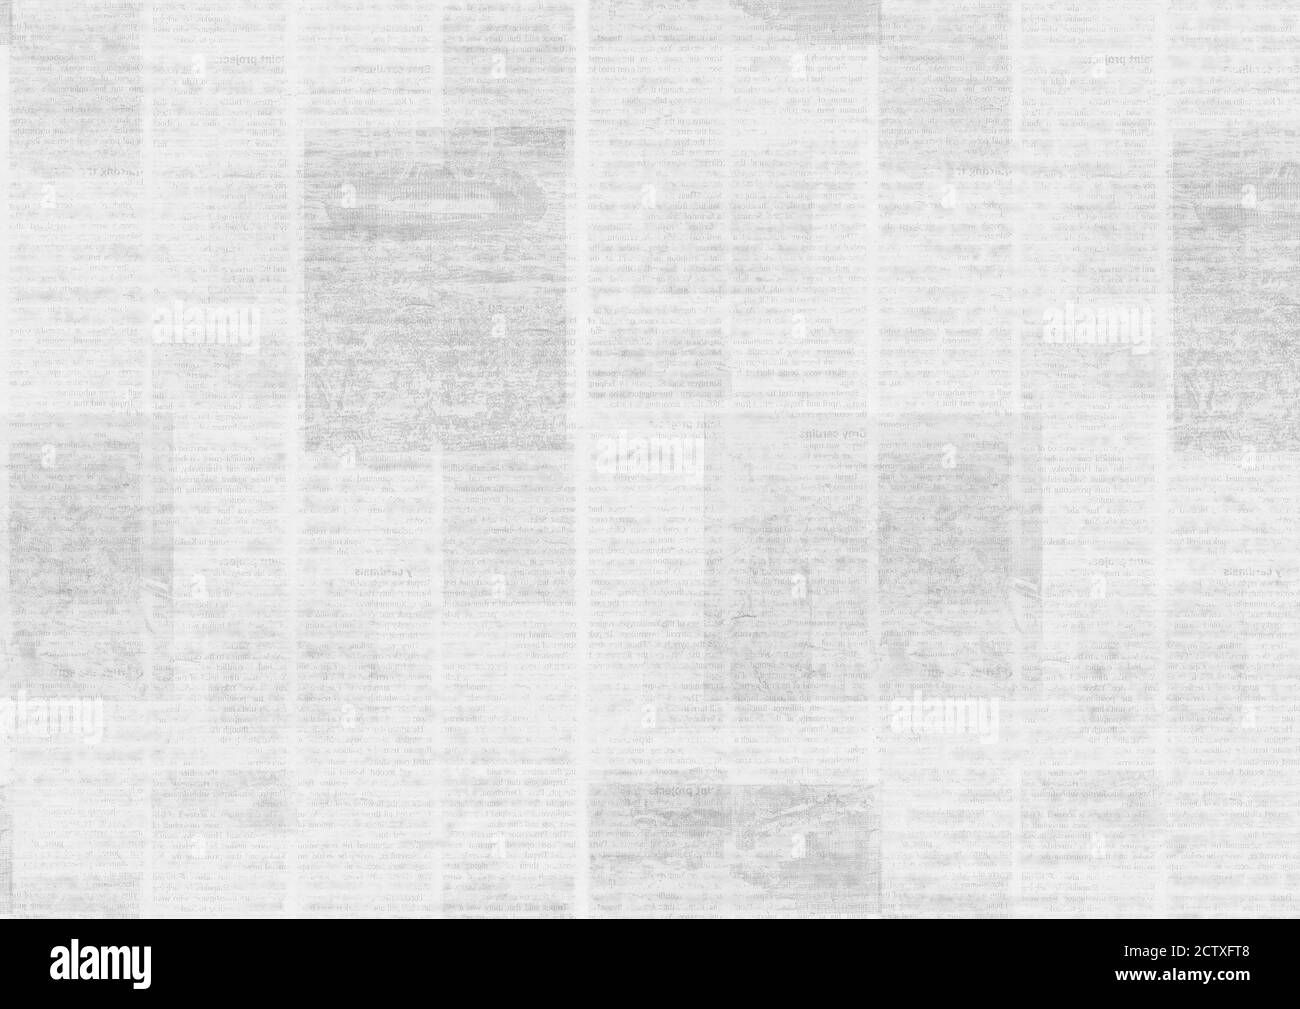 Newspaper old grunge collage horizontal texture. Unreadable vintage news paper pattern. Scratched paper textured page. Gray white newsprint background Stock Photo